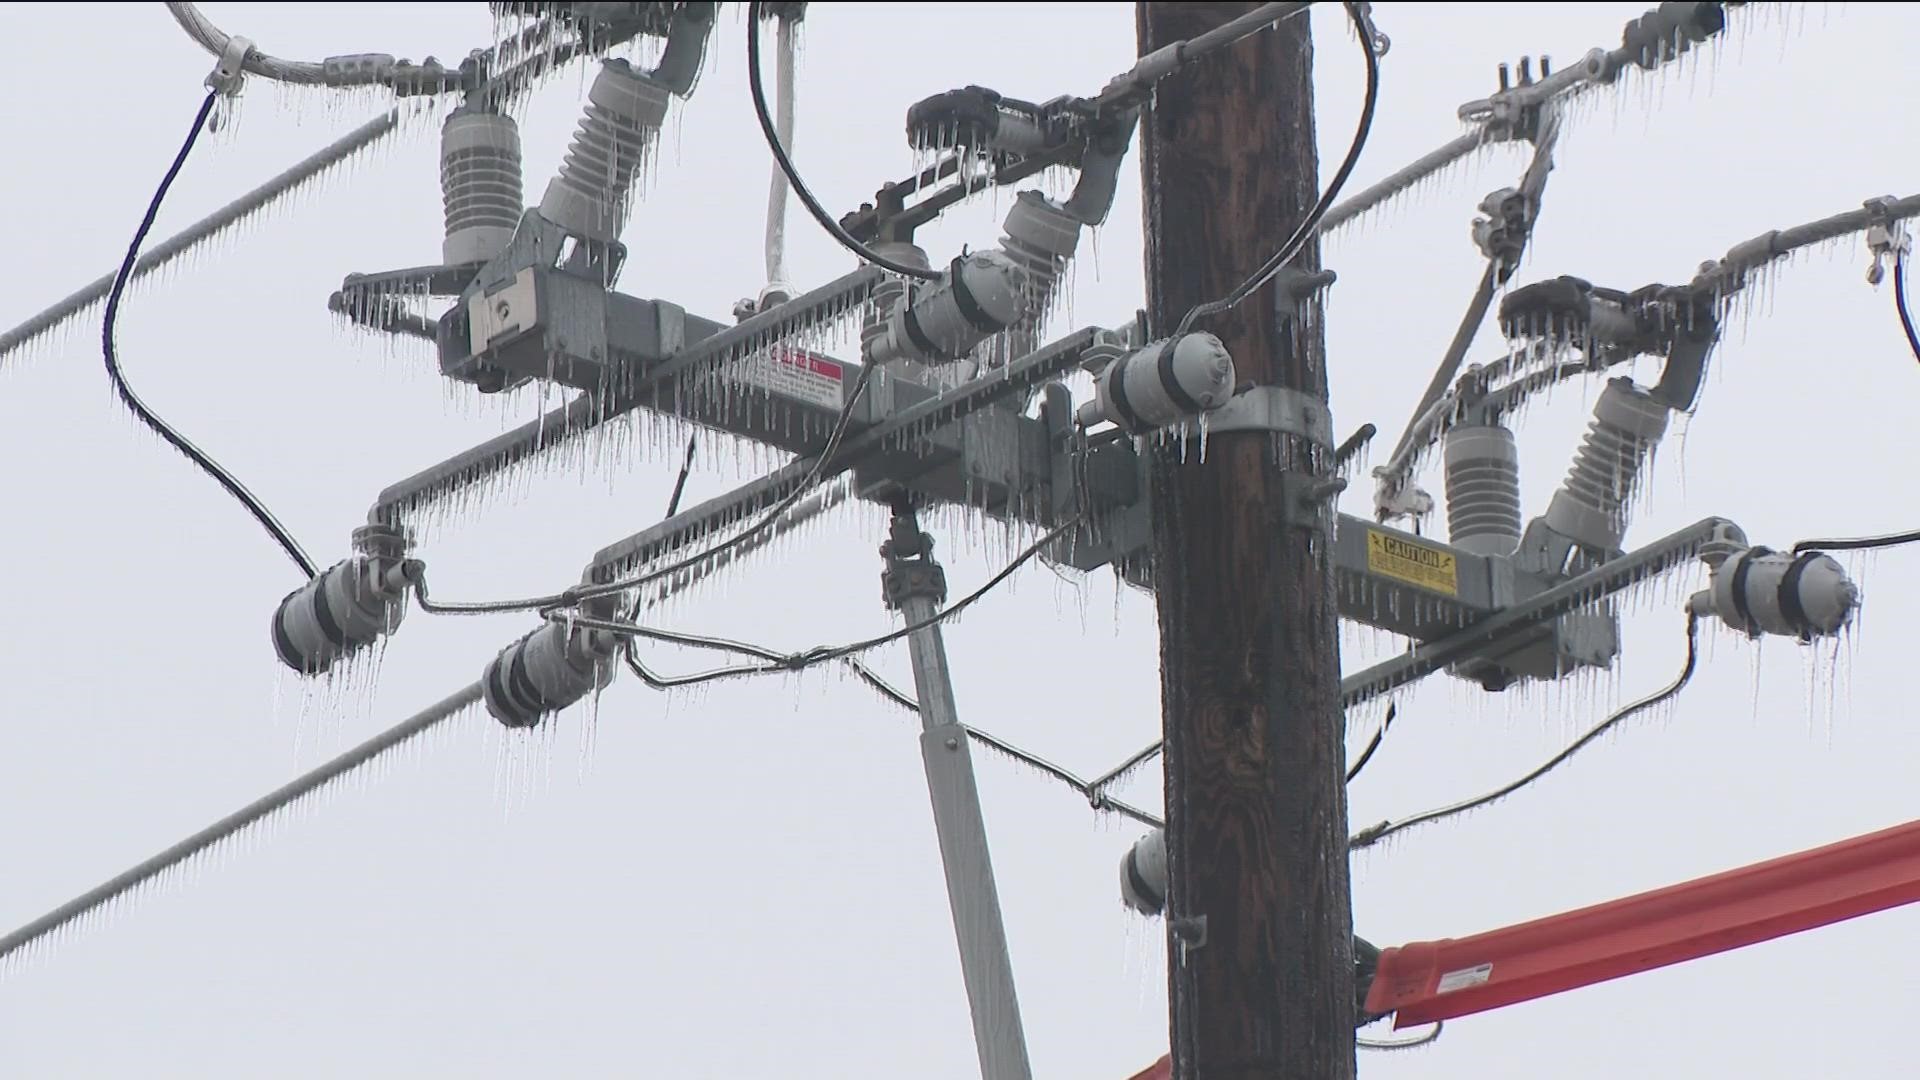 Austin Energy crews have been working to restore power to thousands of customers Wednesday.